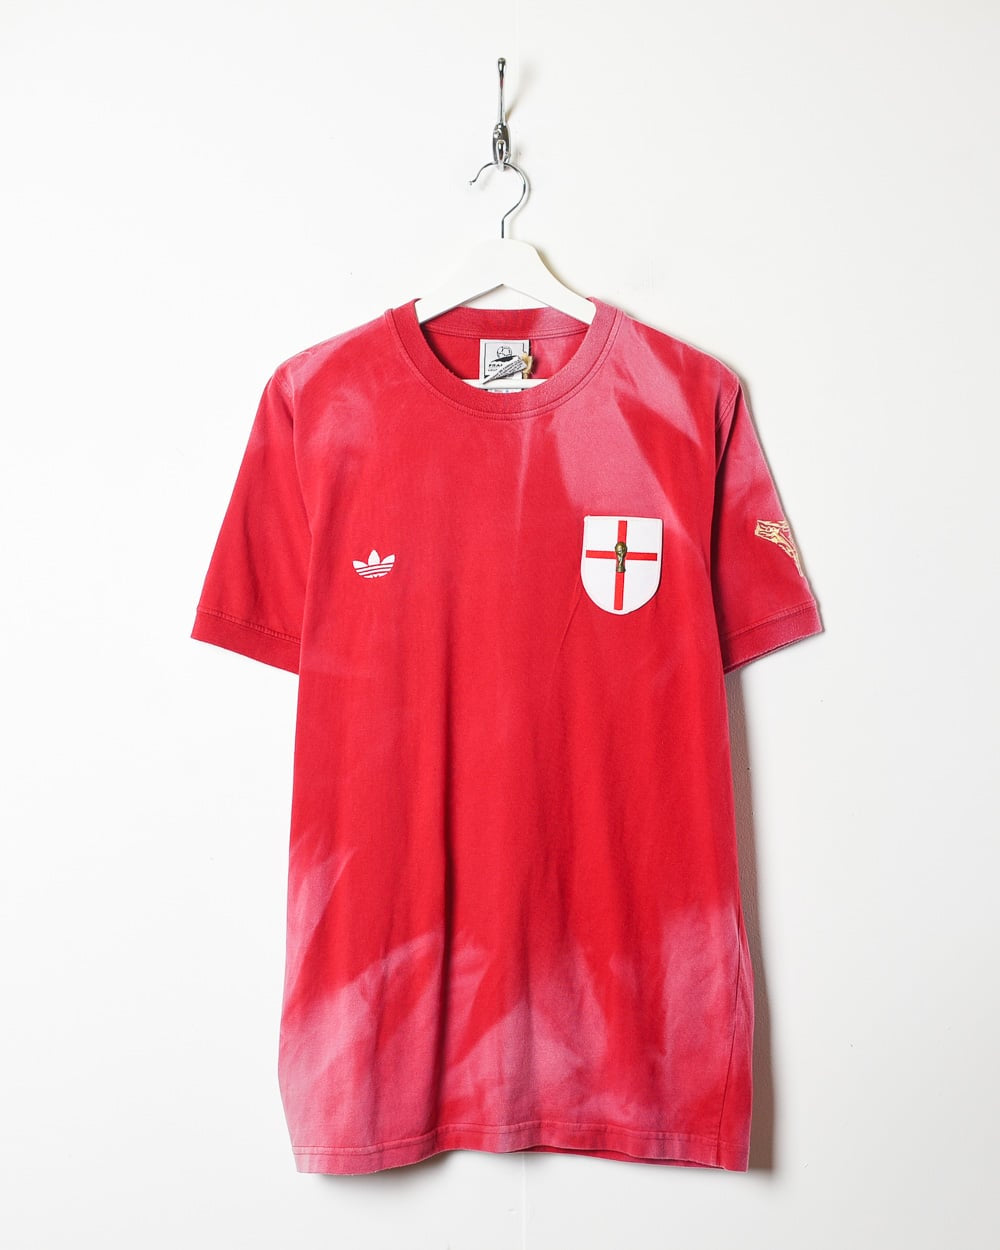 Red Adidas France 98 England Dyed T-Shirt - X-Large